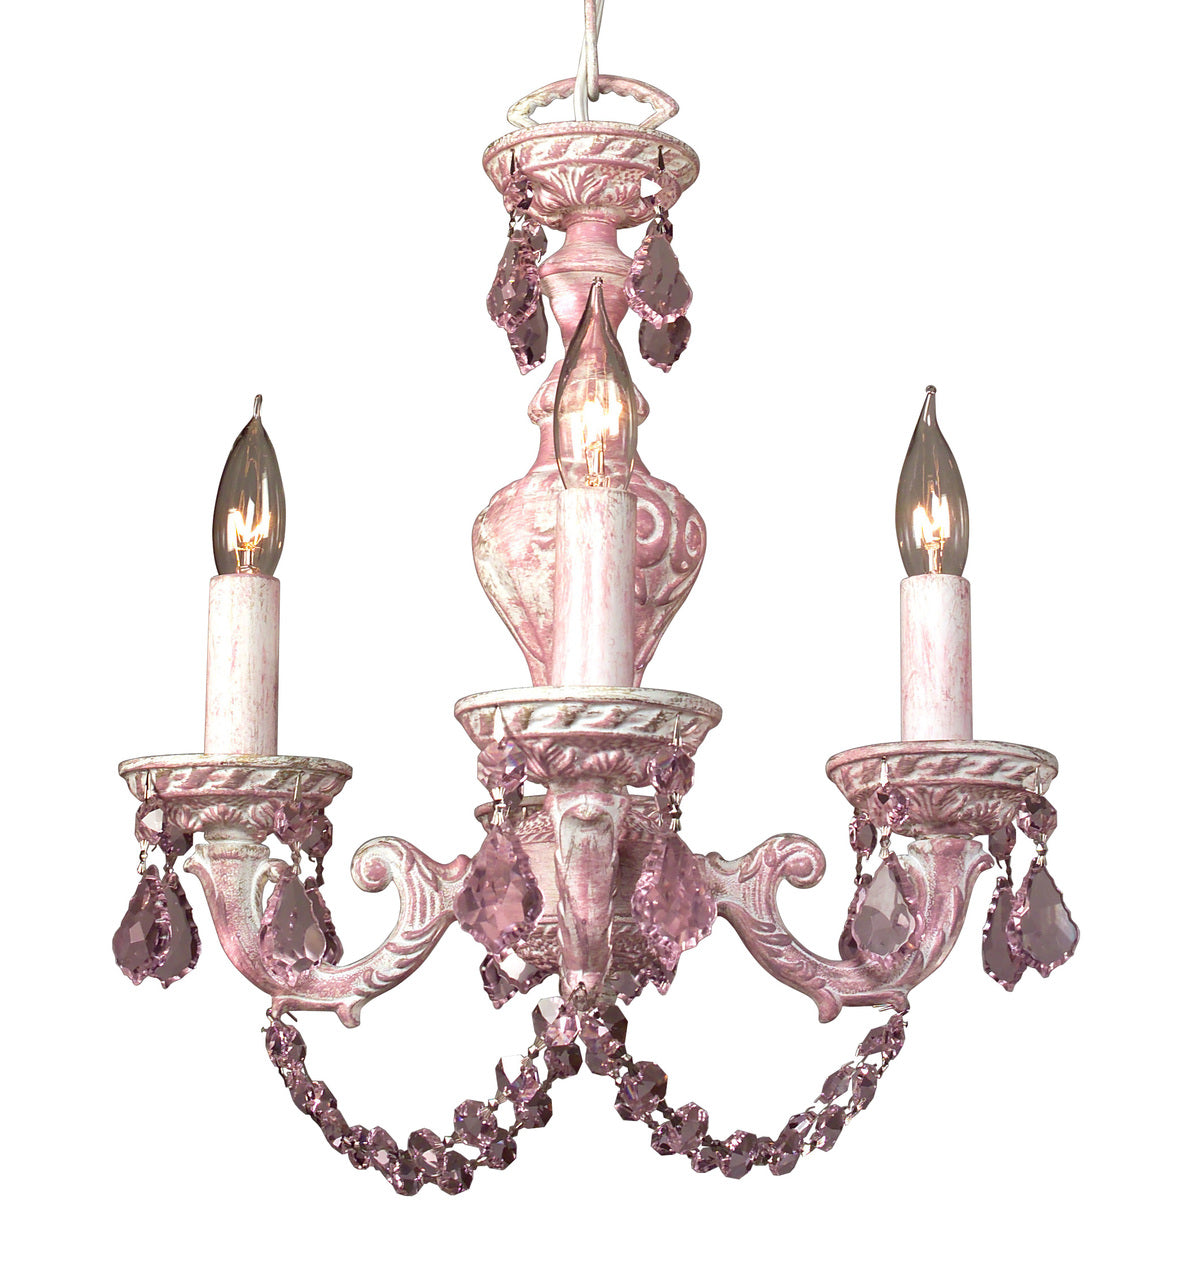 Classic Lighting 8335 PINK PNK Gabrielle Crystal Mini Chandelier in Pink/Antique White